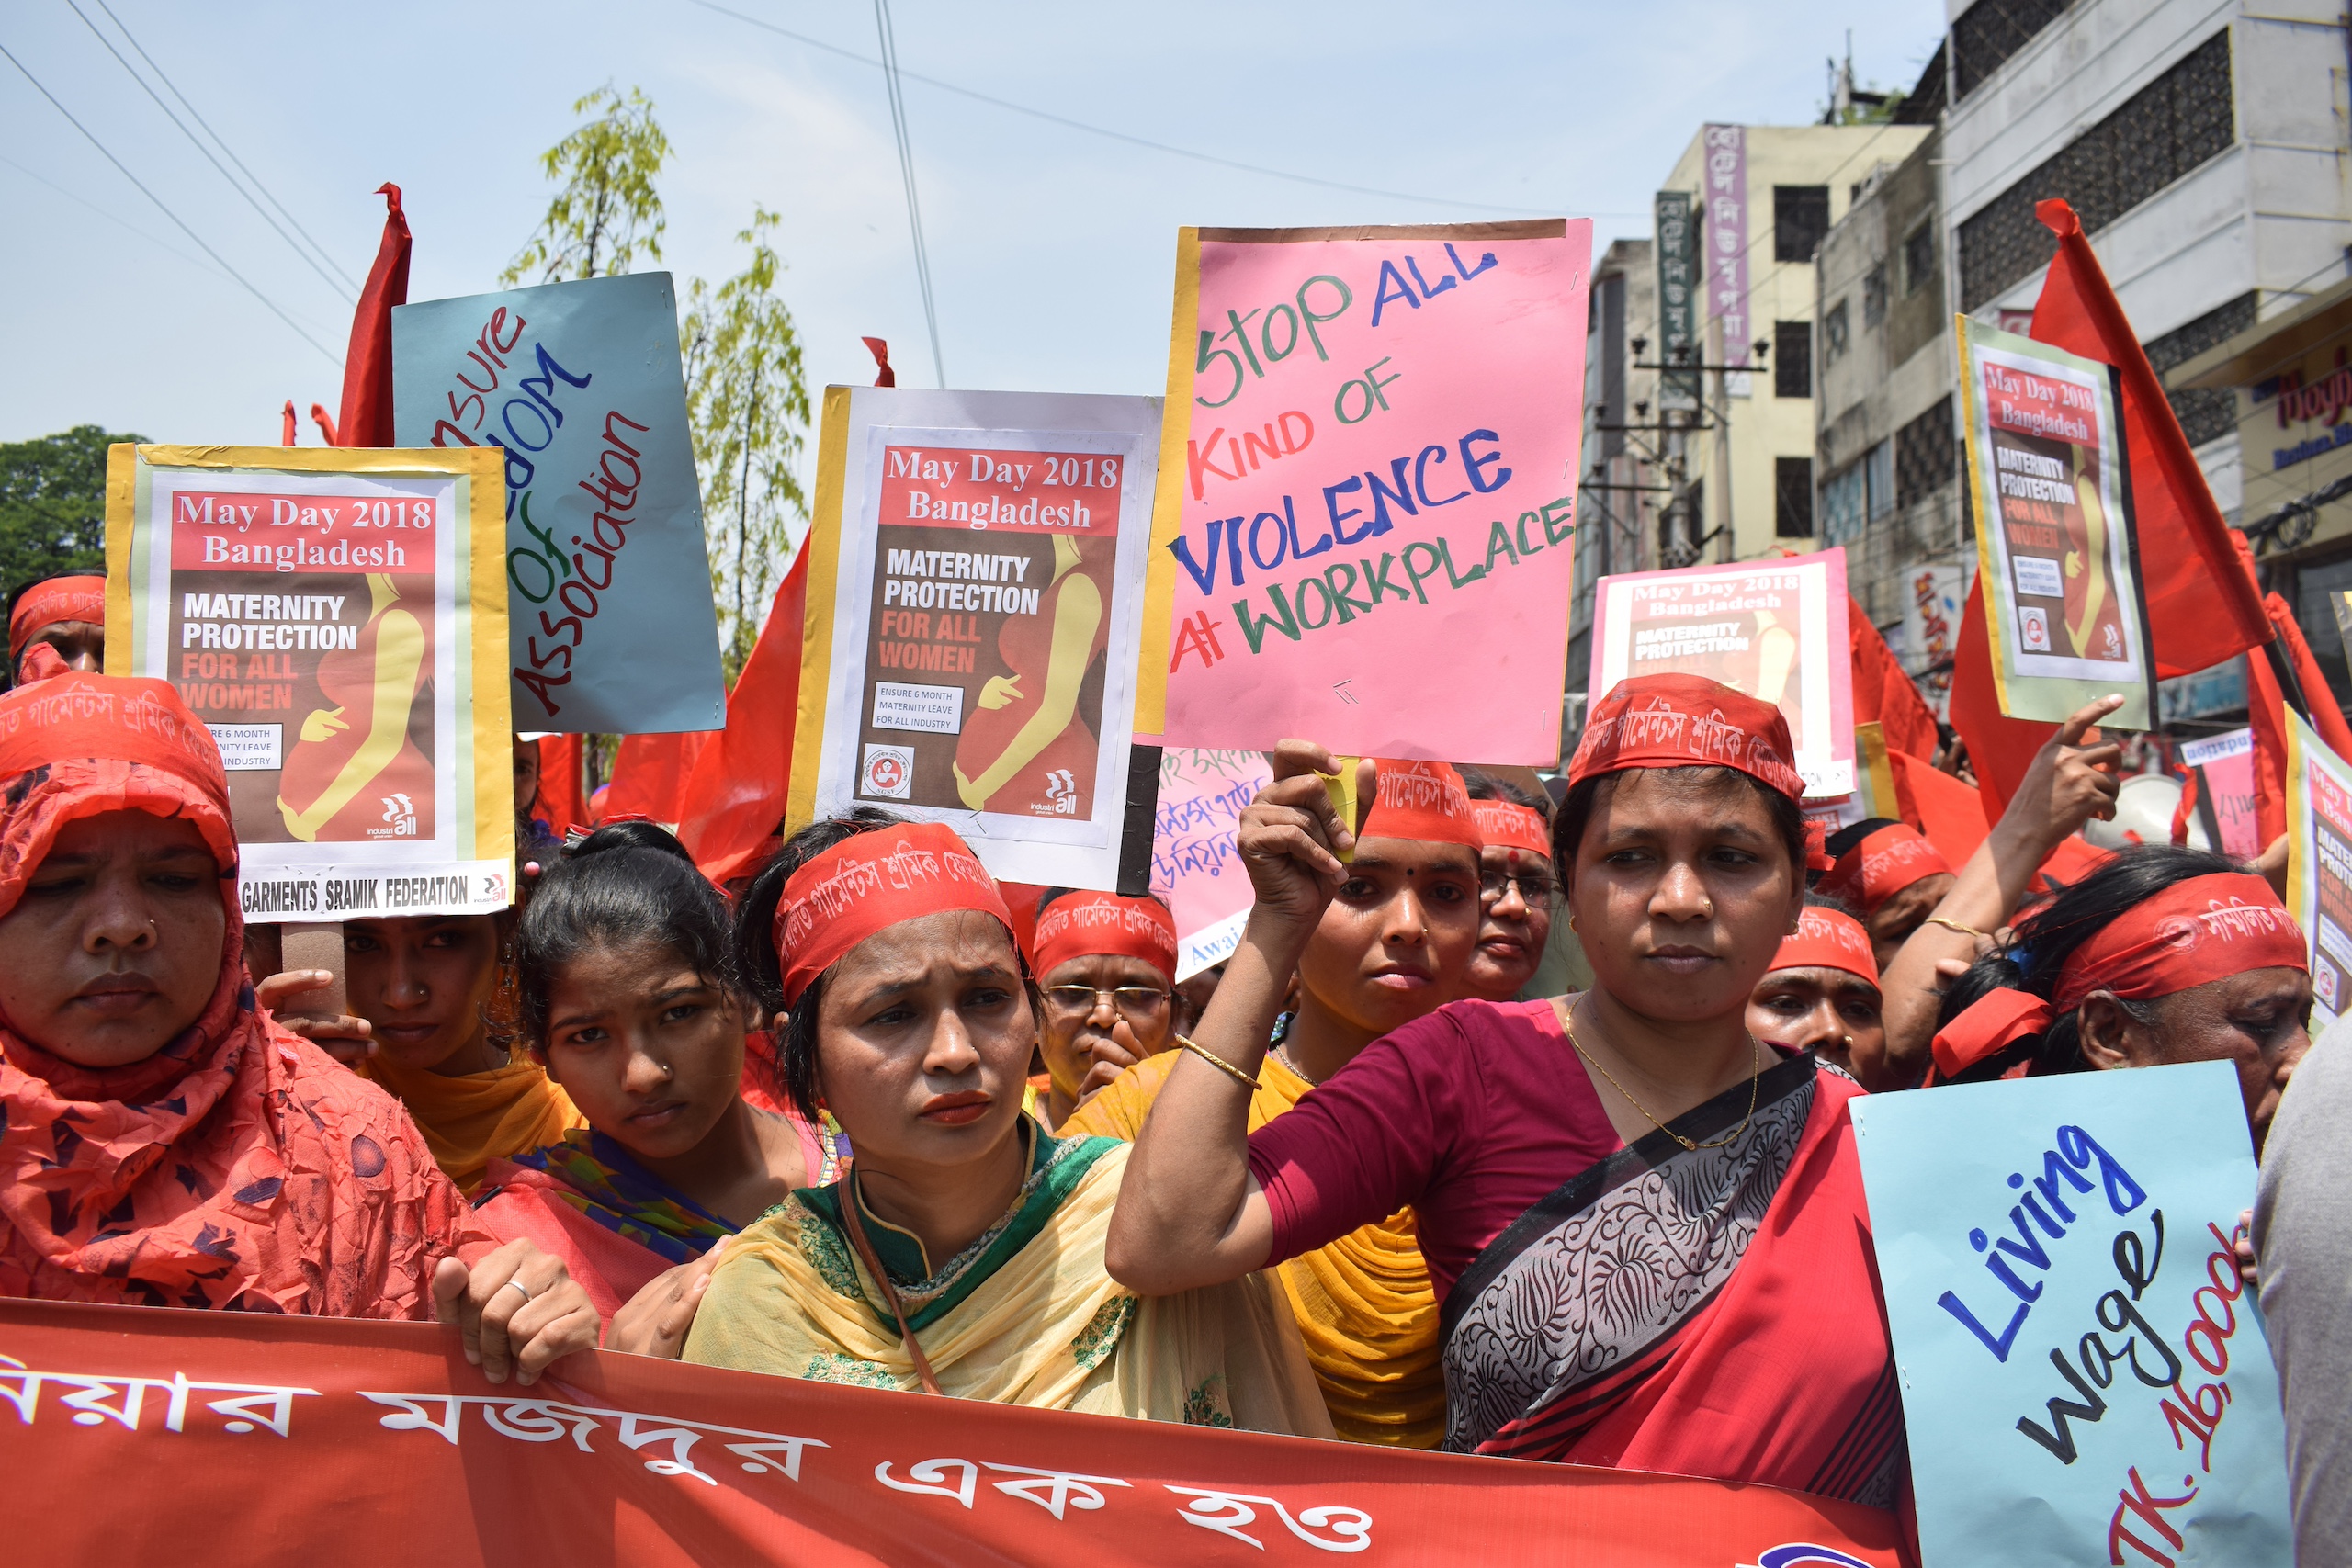 On May 1, 2018, women rally for a living wage, maternity protections, freedom of association and an end to gender-based violence at work, alongside labor rights organization and Solidarity Center partner Awaj Foundation near the Dhaka Press Club. Bangladesh’s ready-made garment industry is the country’s biggest export earner. However, wages are the lowest among major garment-manufacturing nations. Without a union, garment workers, the majority who are women, are often harassed or fired when they ask their employer to fix workplace hazards or seek living wages. Photo Credit: Musfiq Tajwar, Solidarity Center.